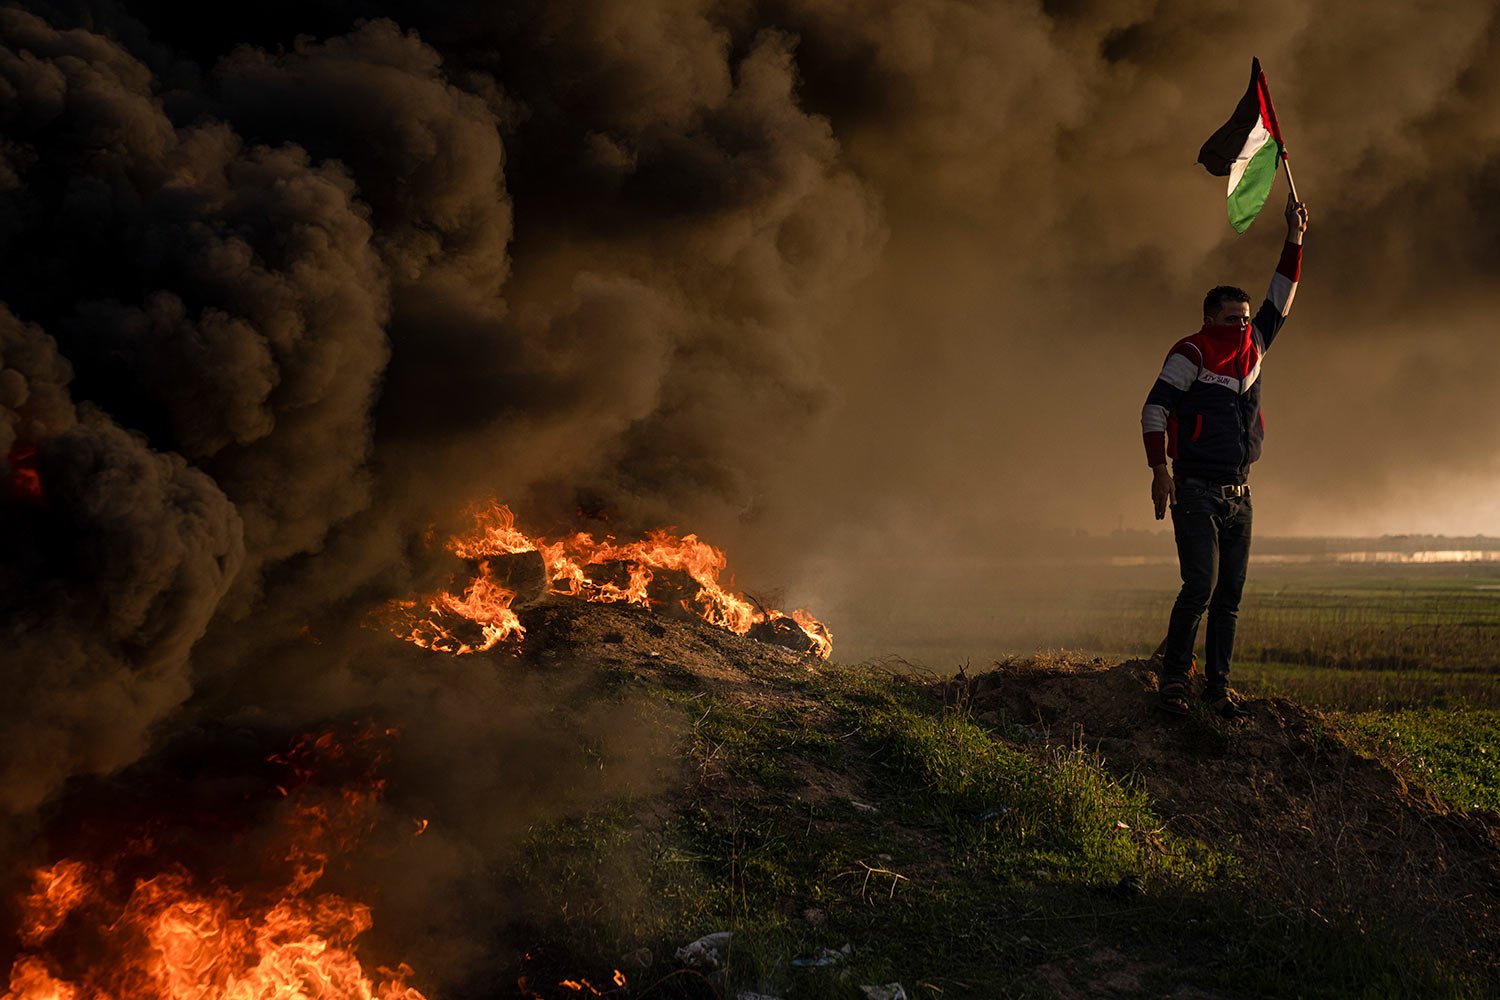  Palestinians burn tires and wave the national flag during a protest against Israeli military raid in the West Bank city of Jenin, along the border fence with Israel, in east of Gaza City, Thursday, Jan. 26, 2023. (AP Photo/Fatima Shbair) 